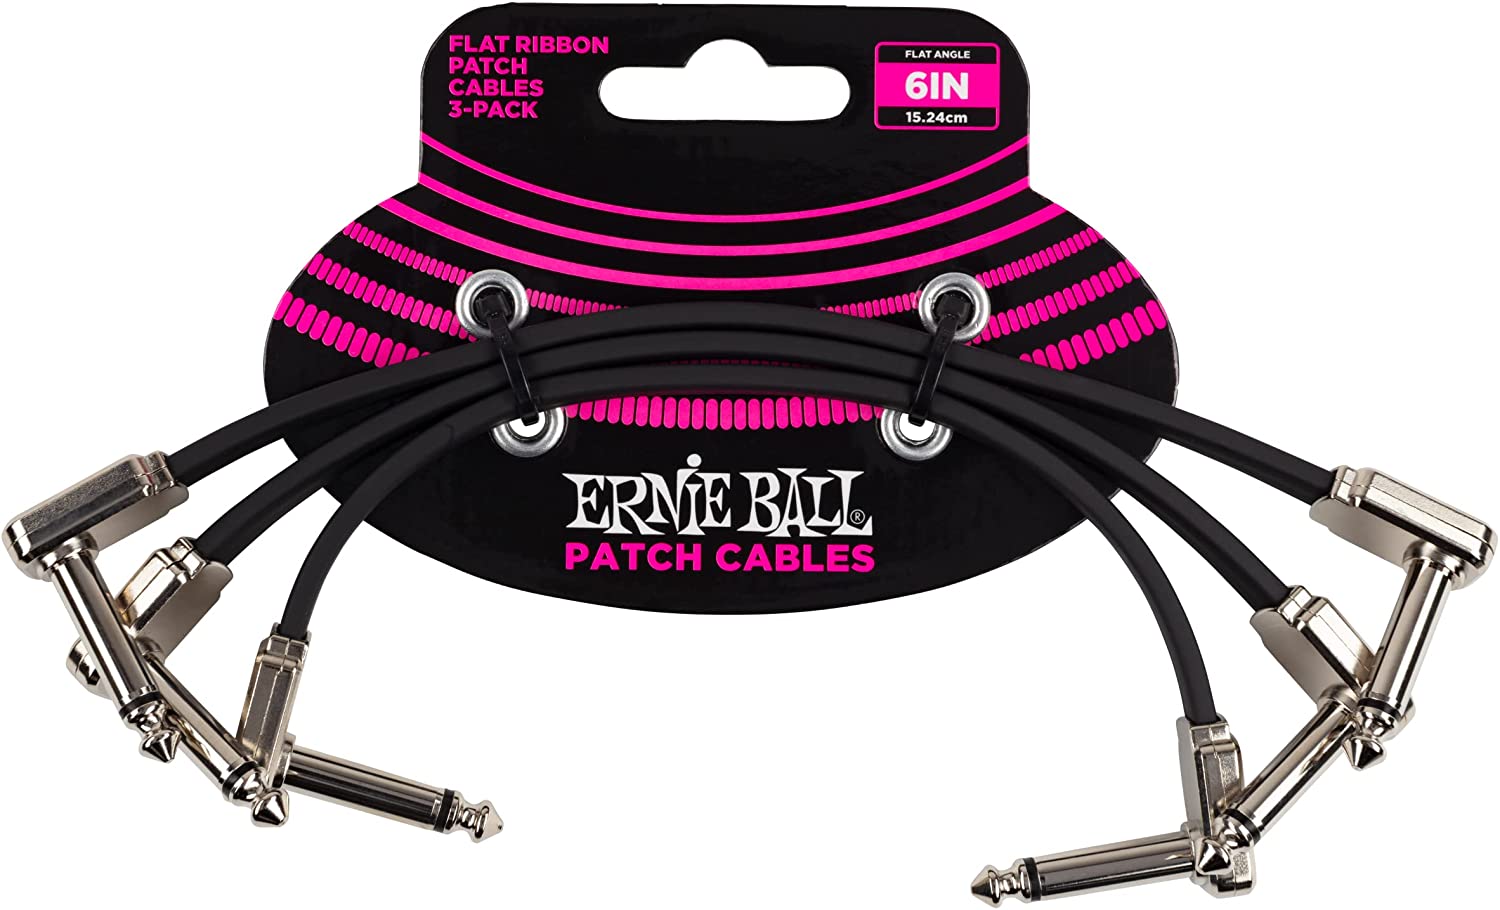 Ernie Ball Flat Ribbon Patch Cable 3-Pack, 6in, Black $17.98